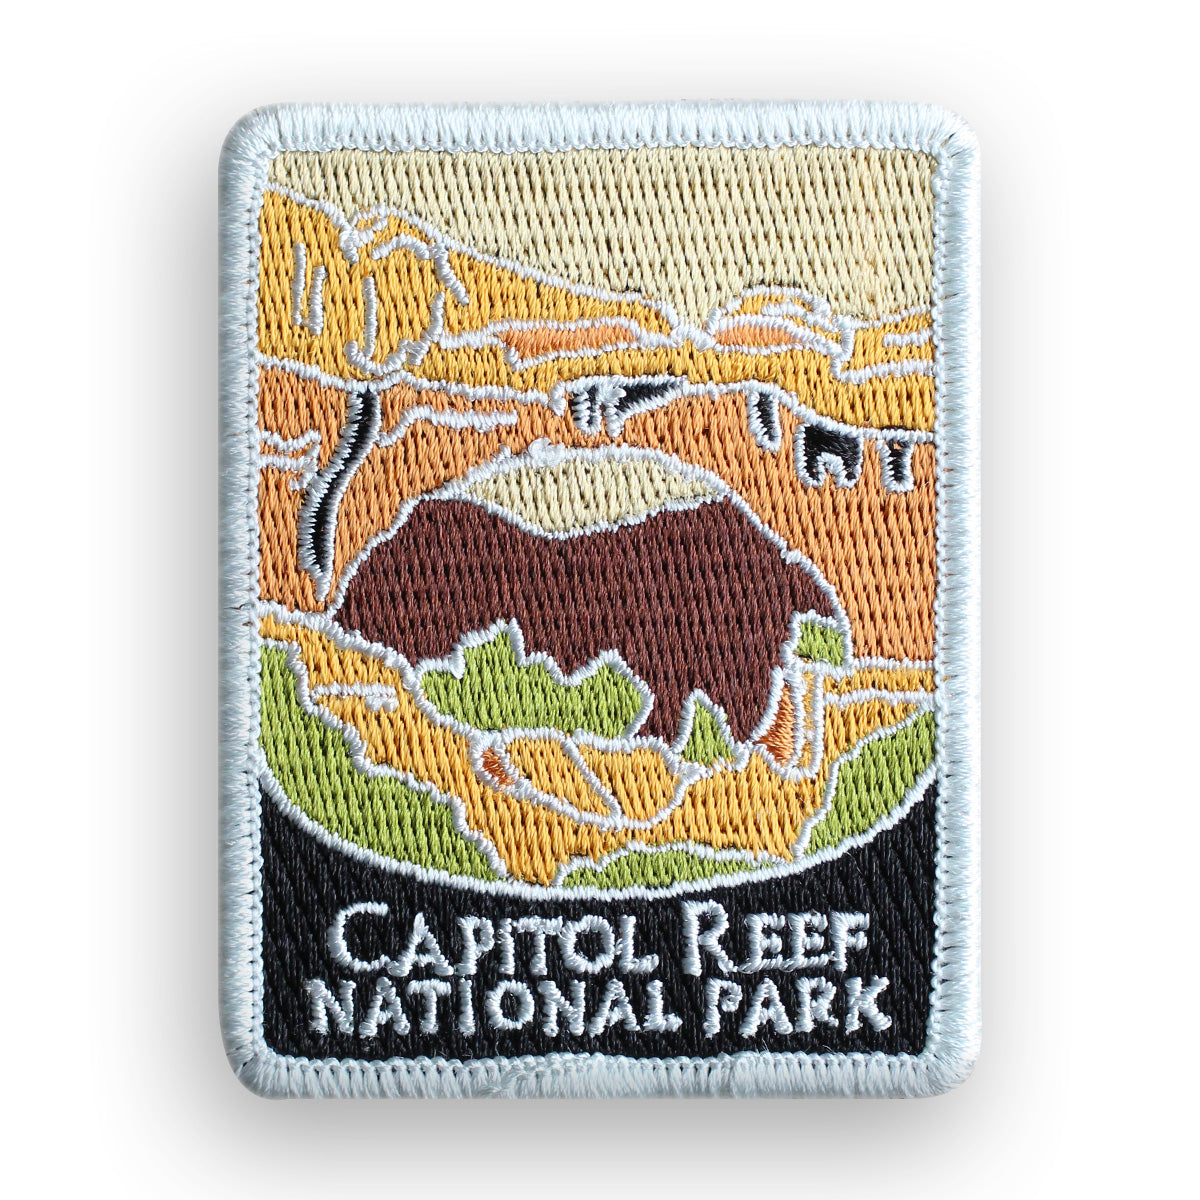 Capitol Reef National Park Traveler Patch